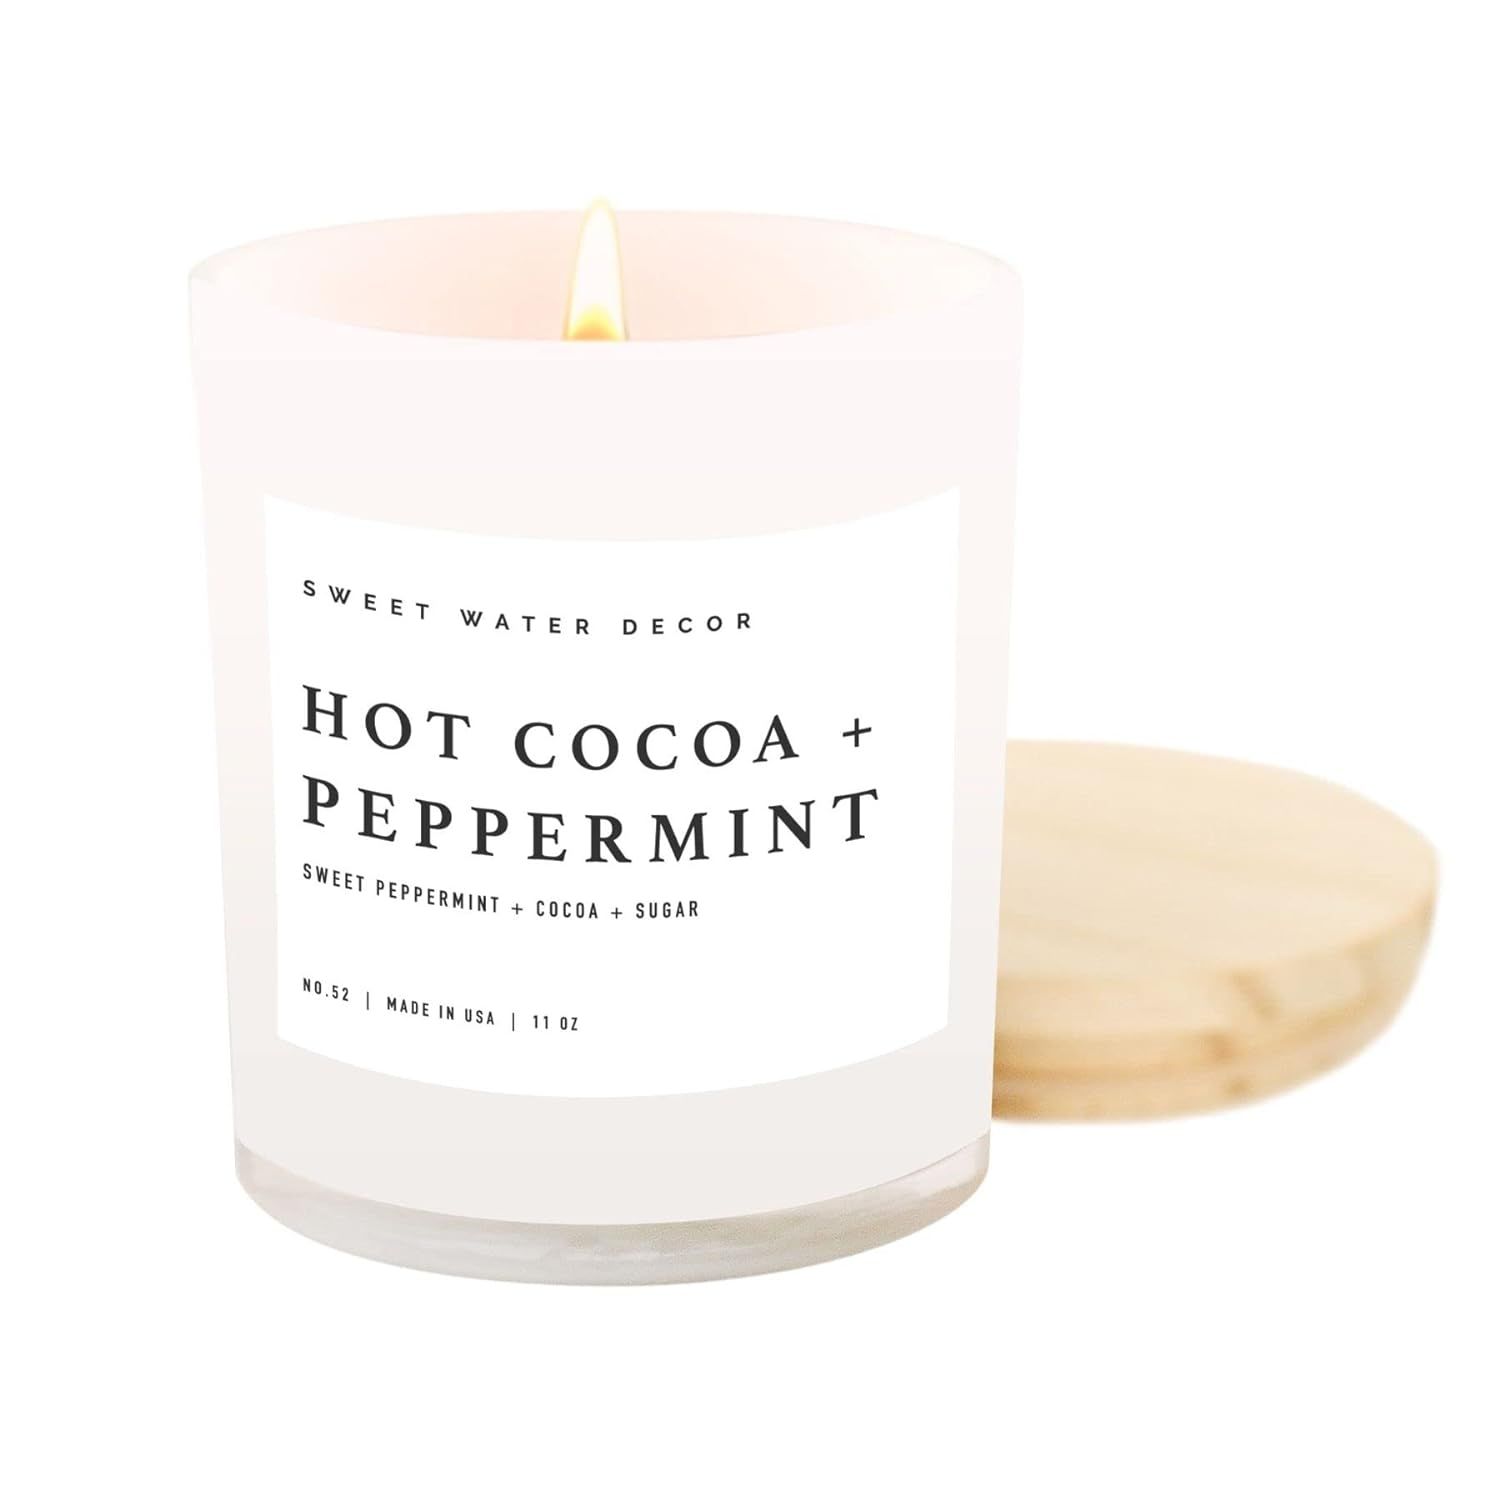 Sweet Water Decor Hot Cocoa + Peppermint Soy Candle | Chocolate, Peppermint, and Vanilla Holiday ... | Amazon (US)